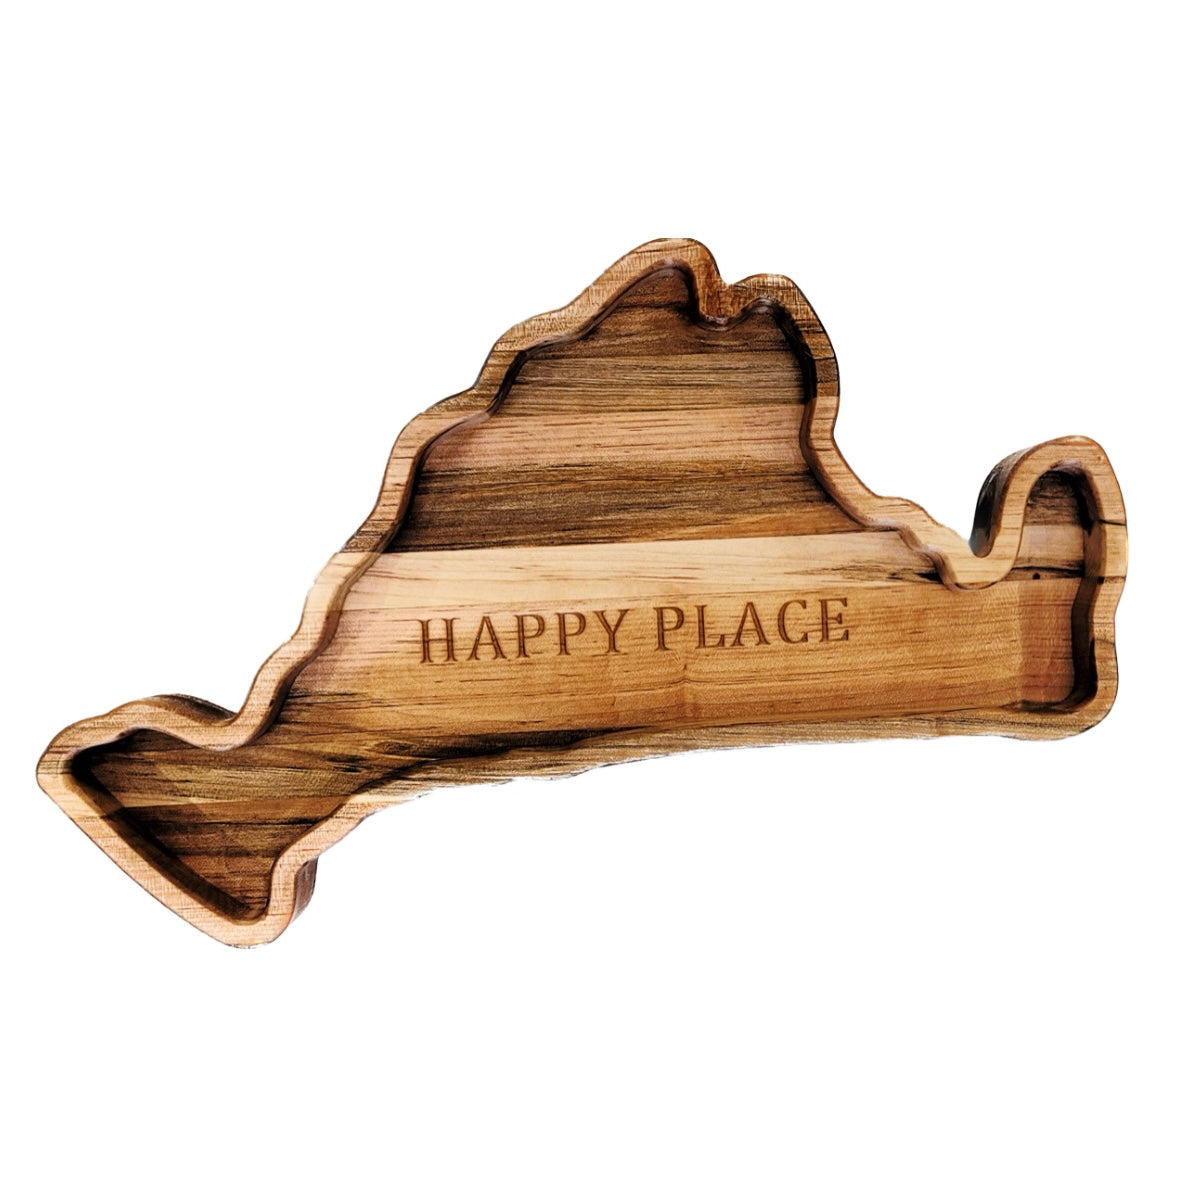 Martha's Vineyard shaped charcuterie board engraved with HAPPY PLACE